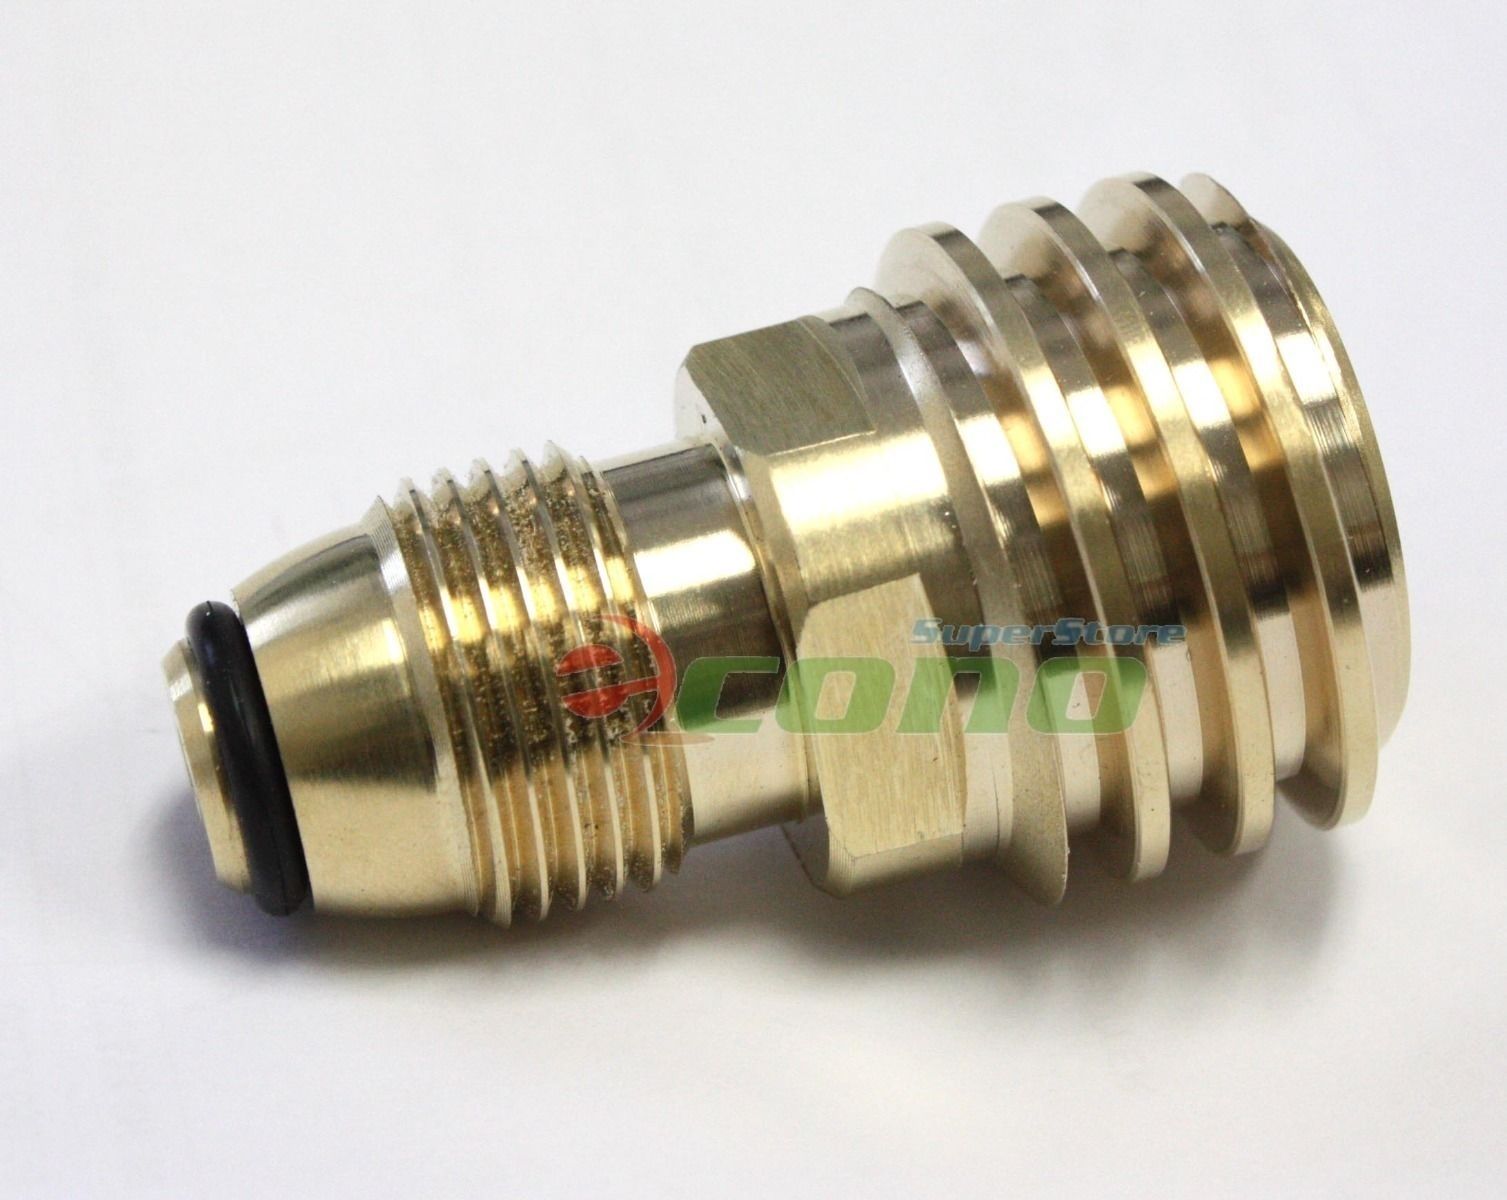 Details about   1x Converts Propaner LP TANK POL Service Valve to QCC Brass Refill Adapter 